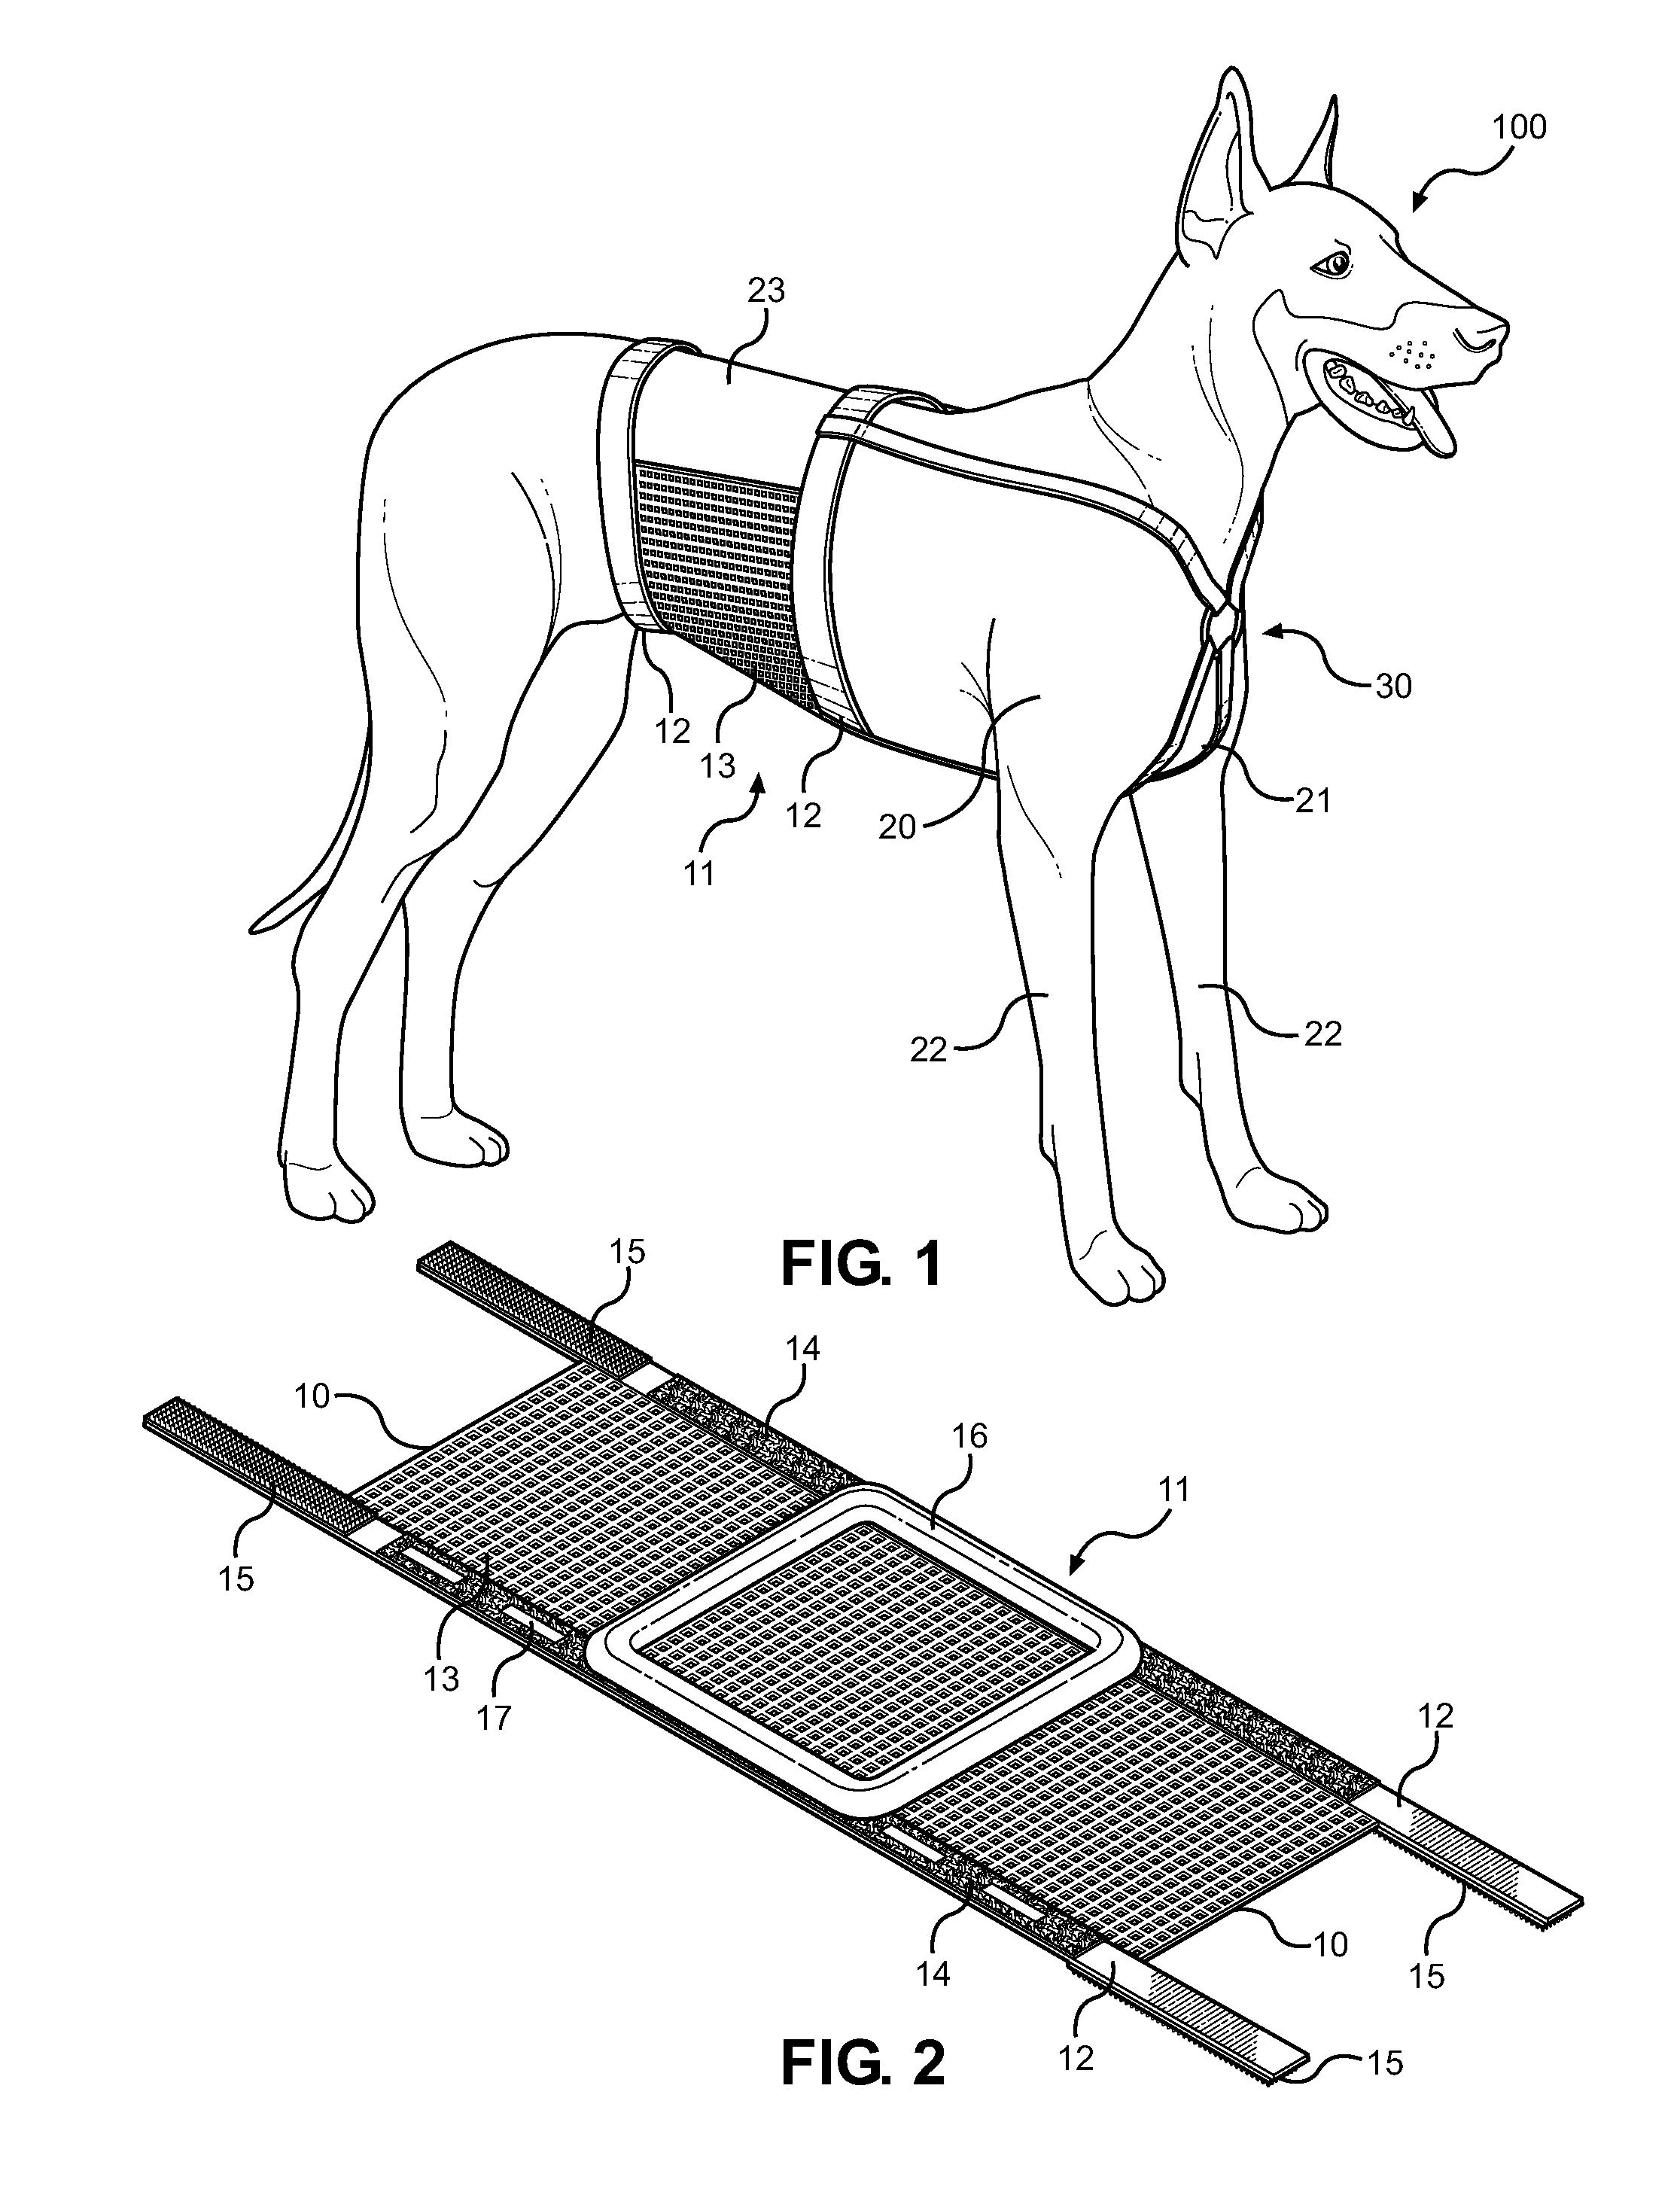 Veterinary Covering Support for Incision or Wound Site